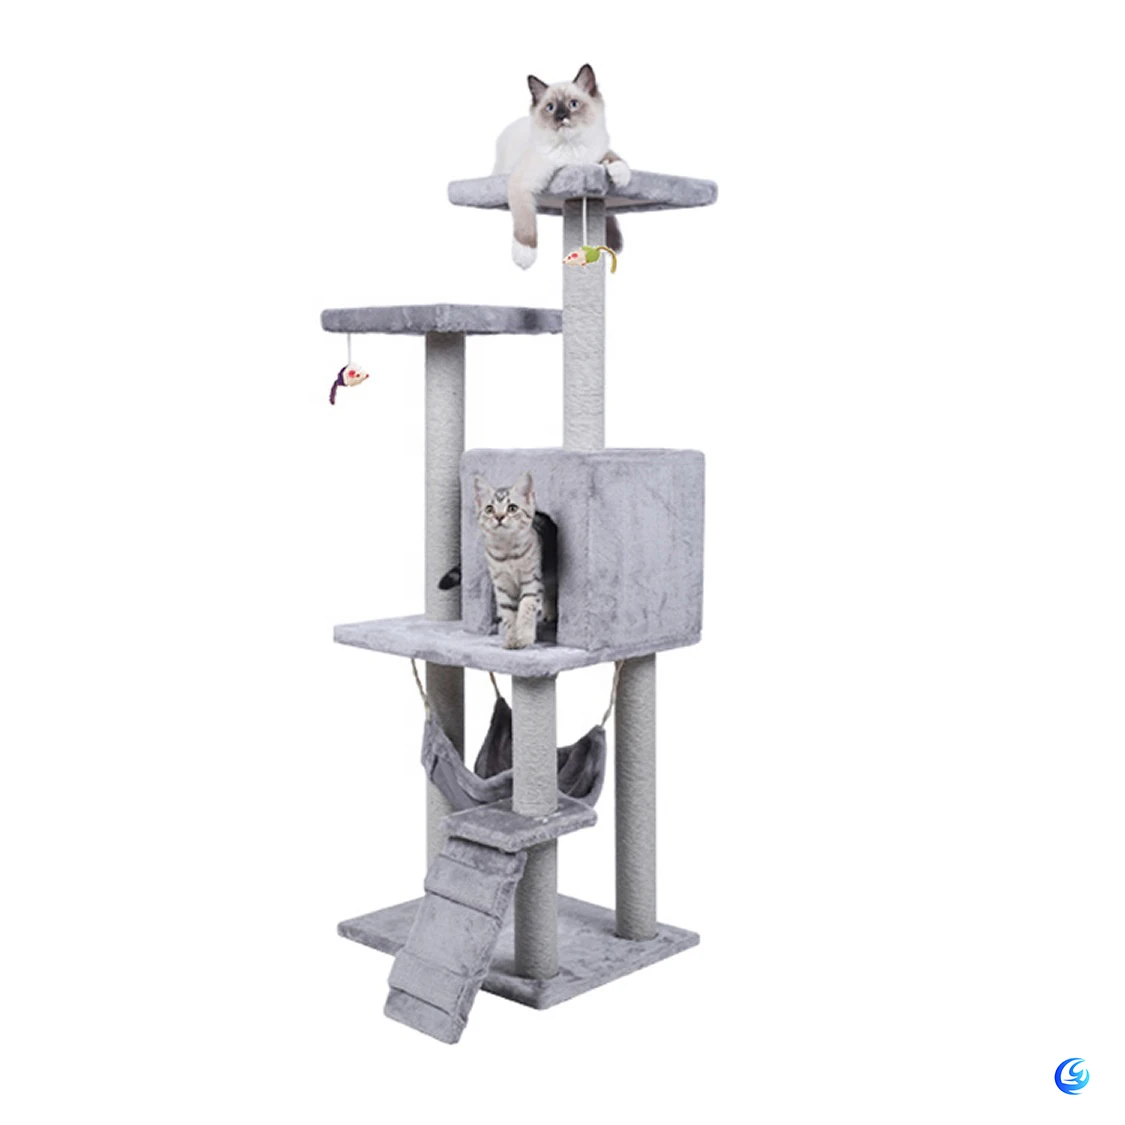 

Arbre A Chat 2022 Pet Toy Plush Animal Cat Tree House Scratcher Luxury Large High Quality Cat Tree Tower, As picture showed